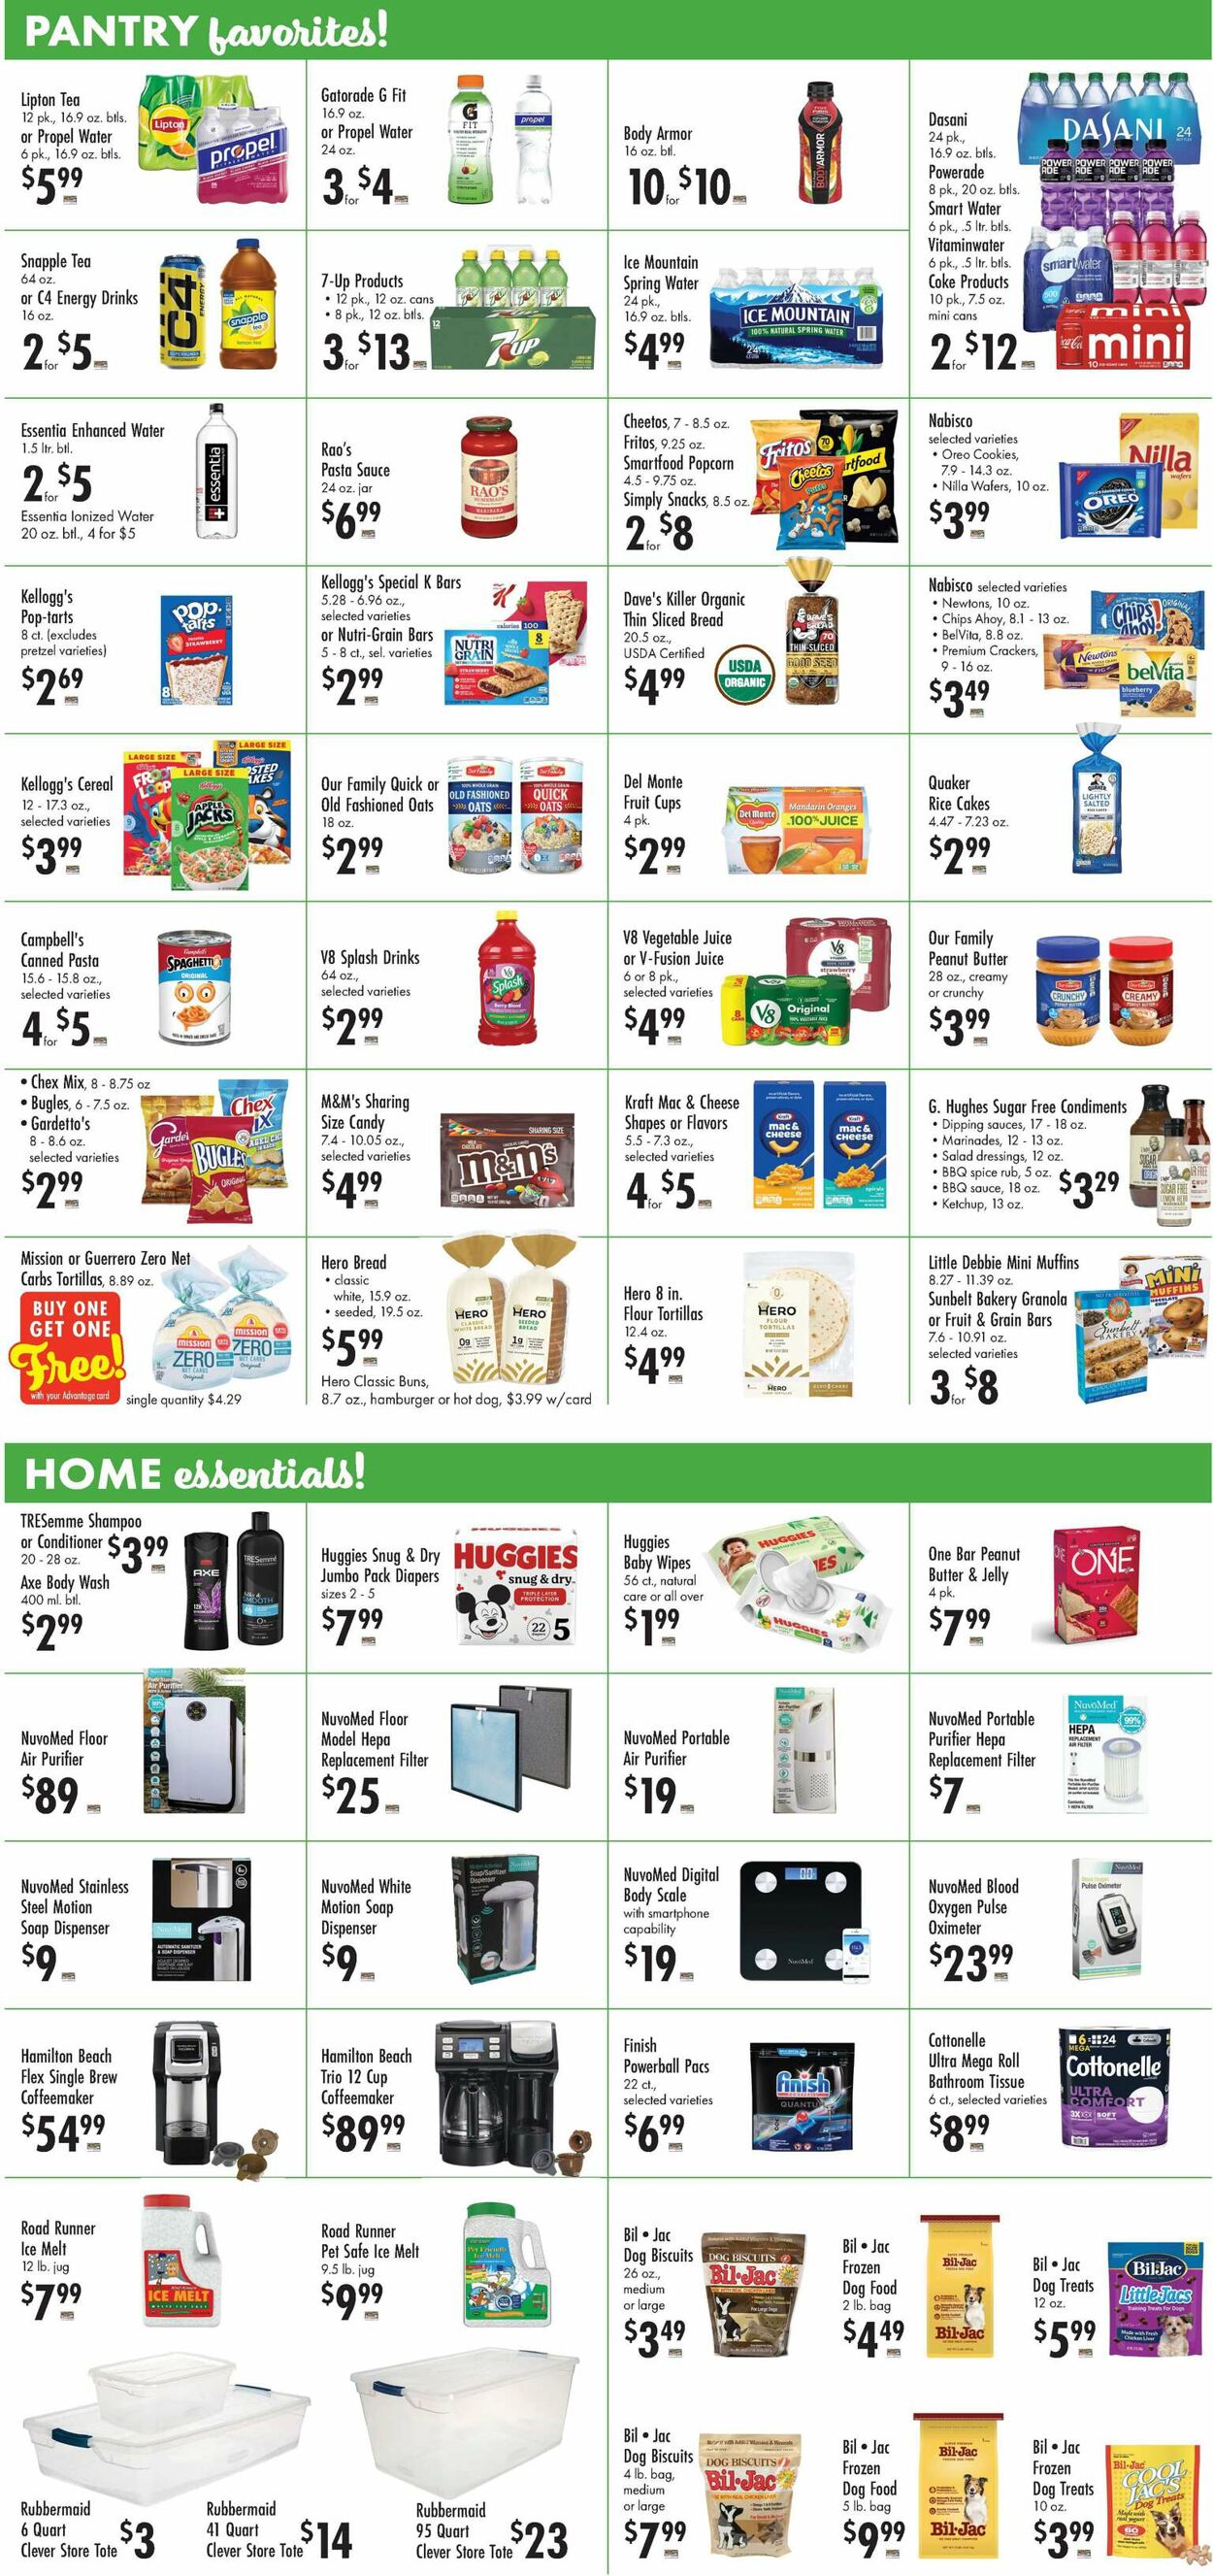 Catalogue Buehler's Fresh Foods from 01/03/2024